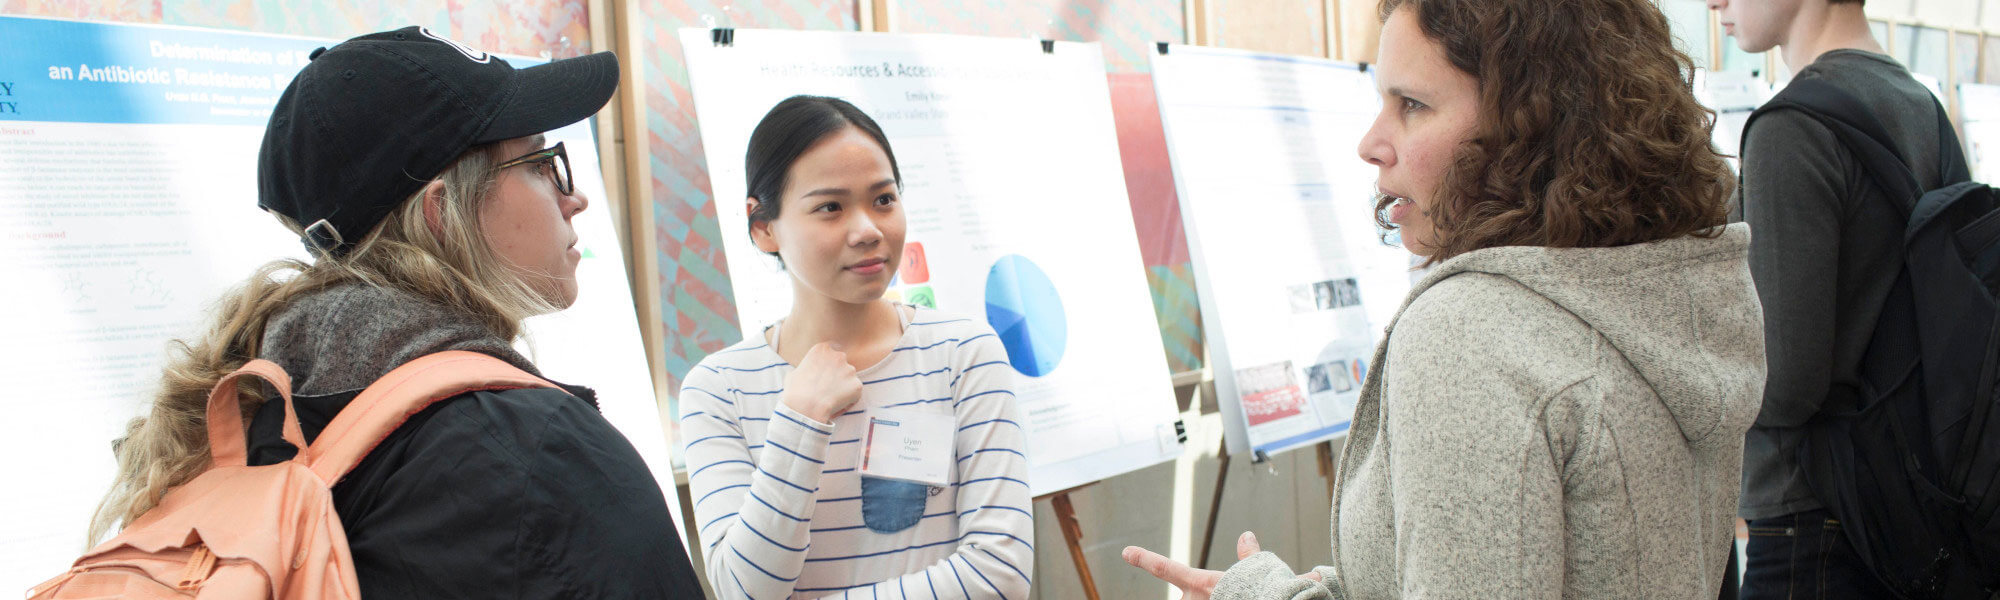 Students discuss a research poster being presented by another student.